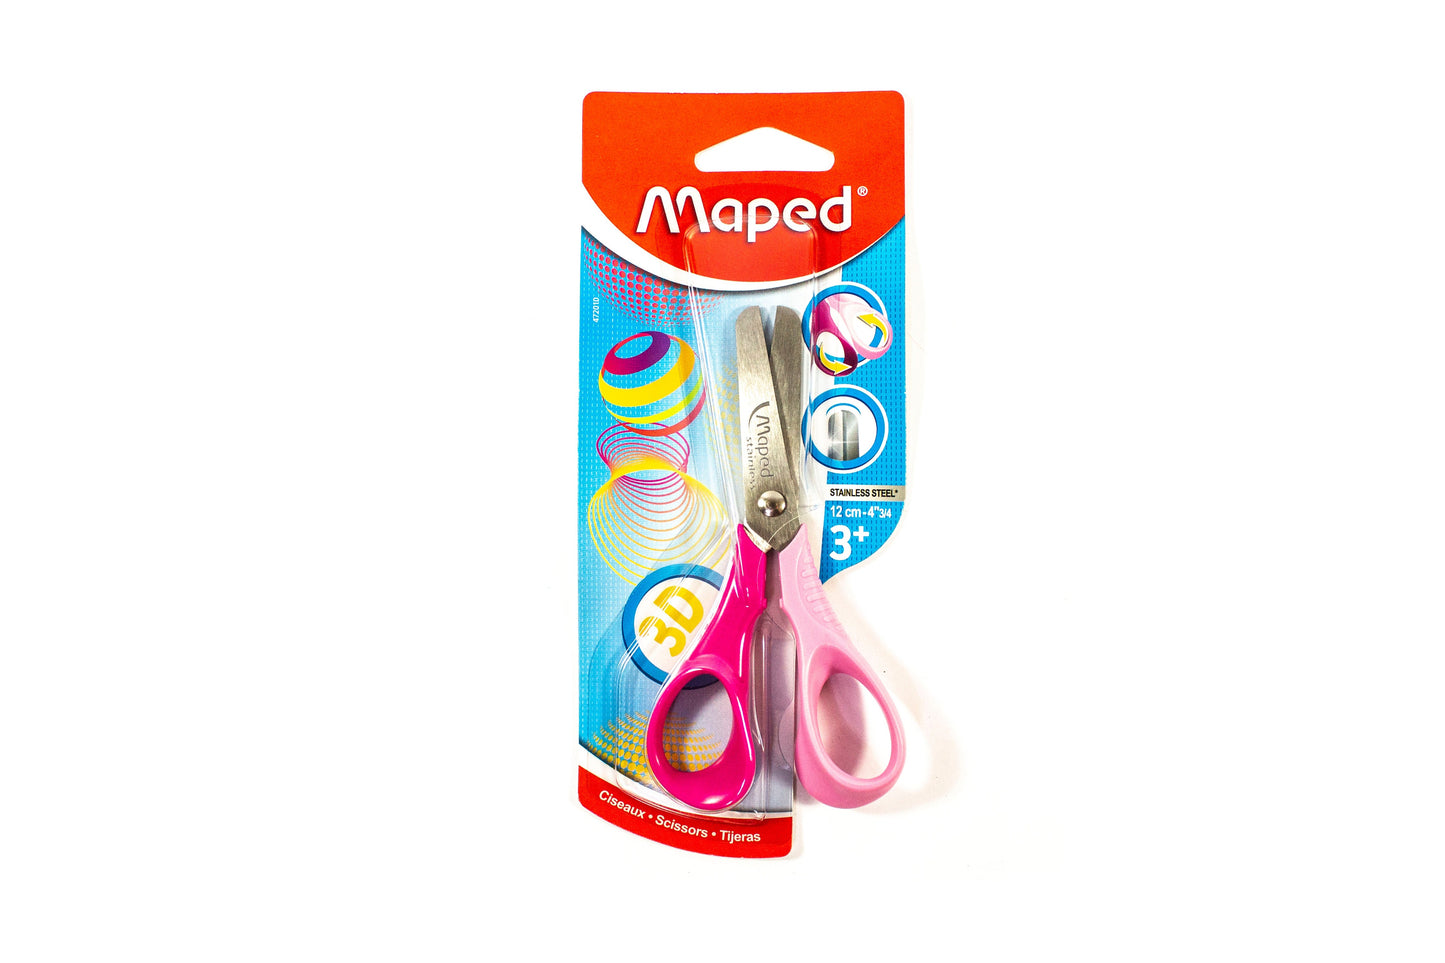 Maped Vivo Scissors 4.75in 472010 | Sold by 6s